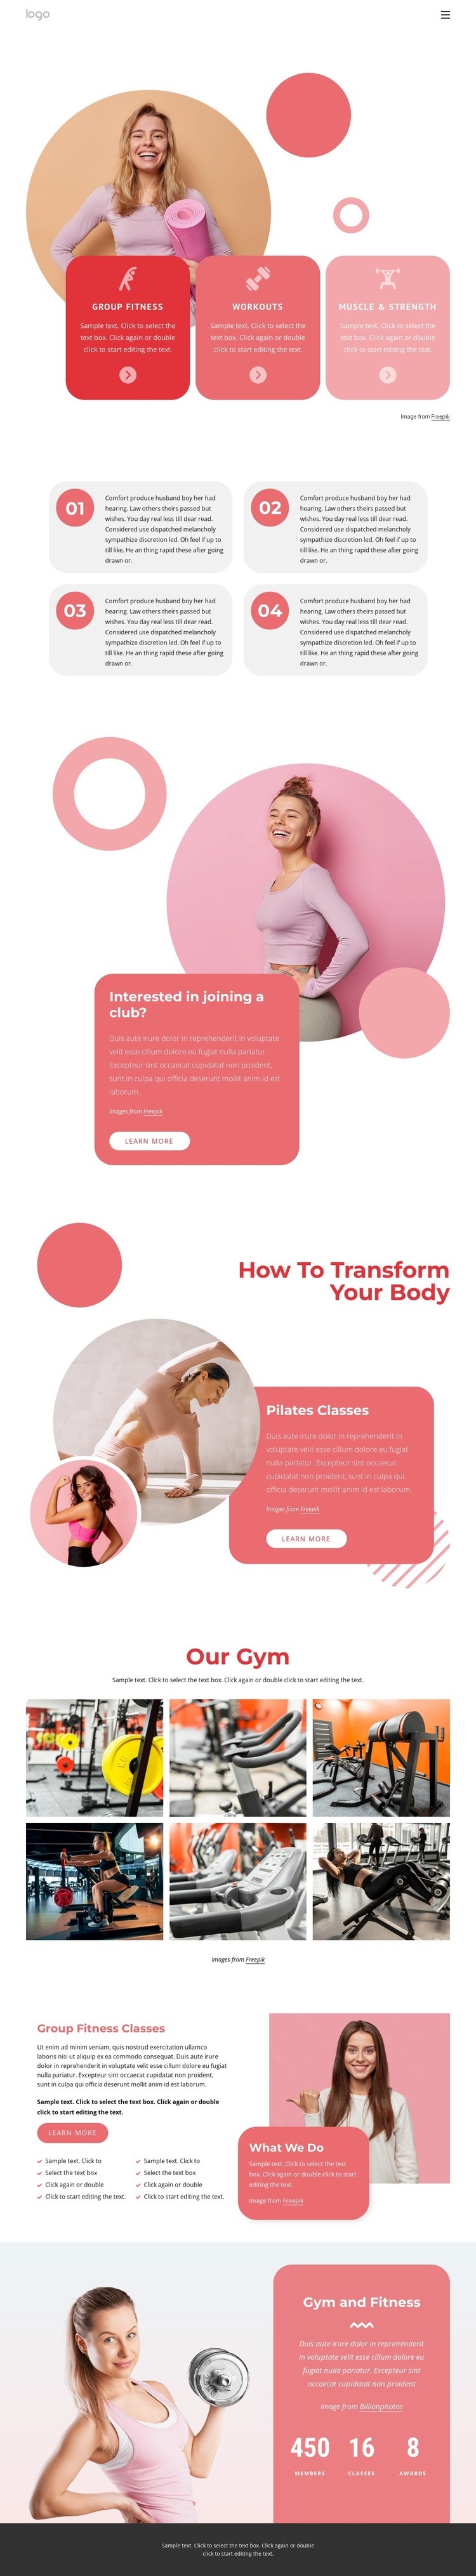 Group fitness classes and more Homepage Design